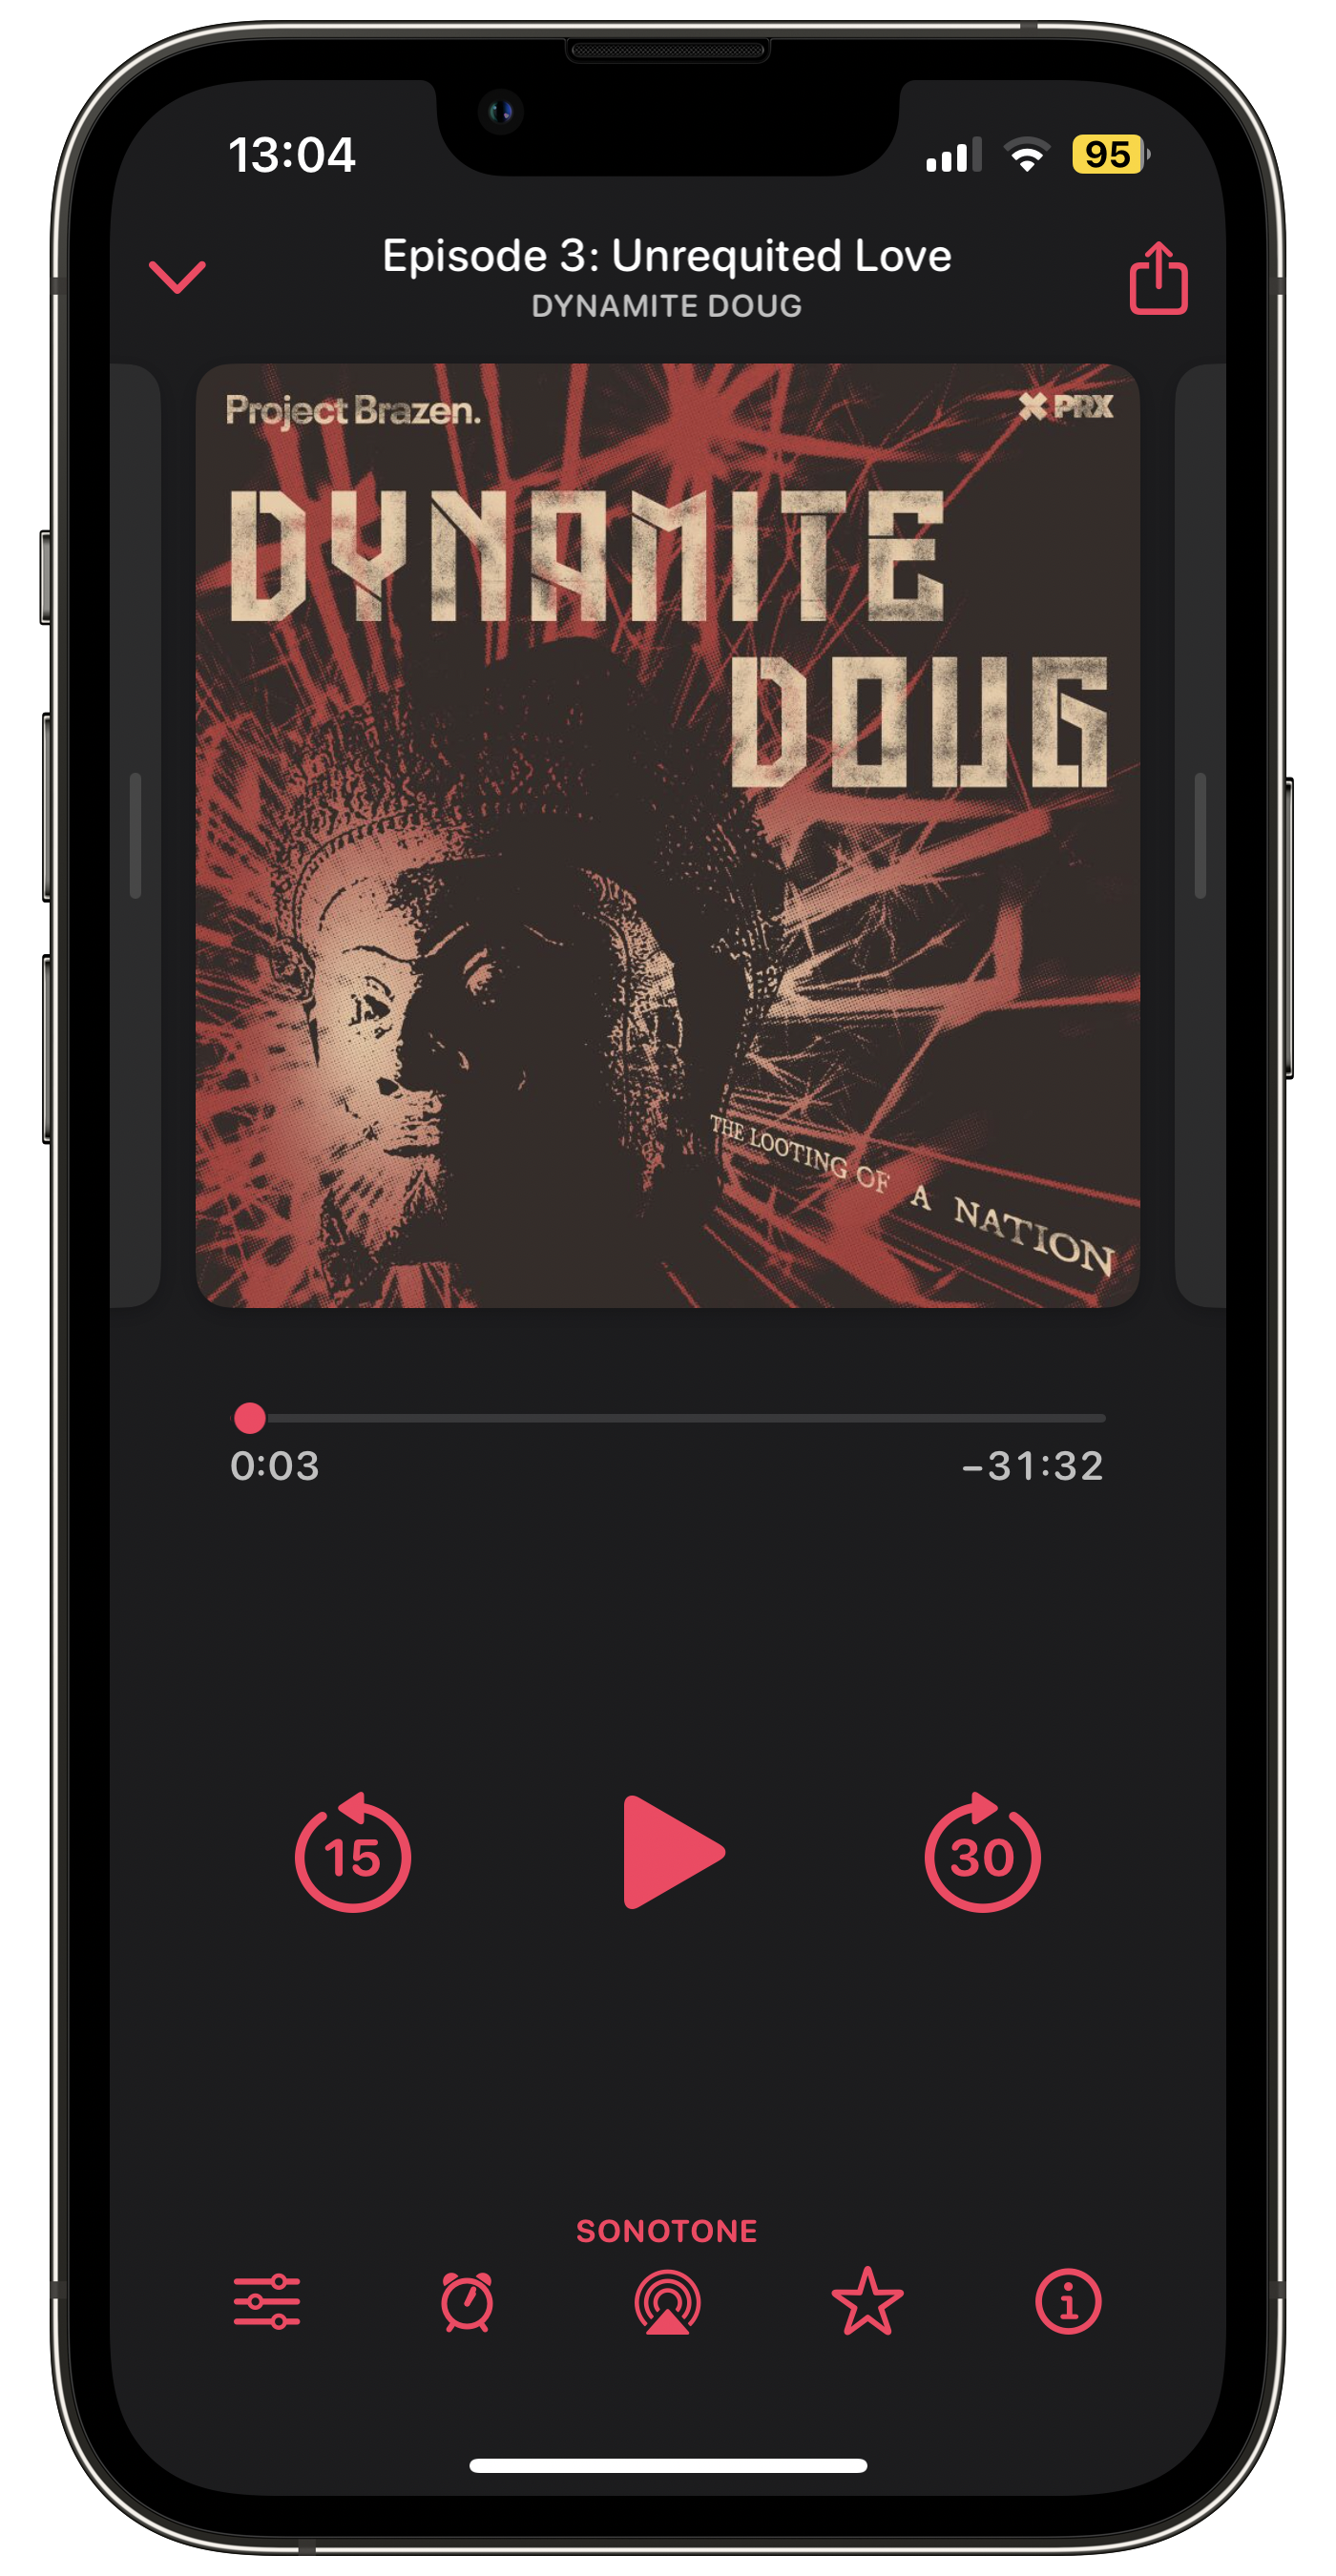 mock-up of an iPhone playing an episode of the Dynamite Doug podcast